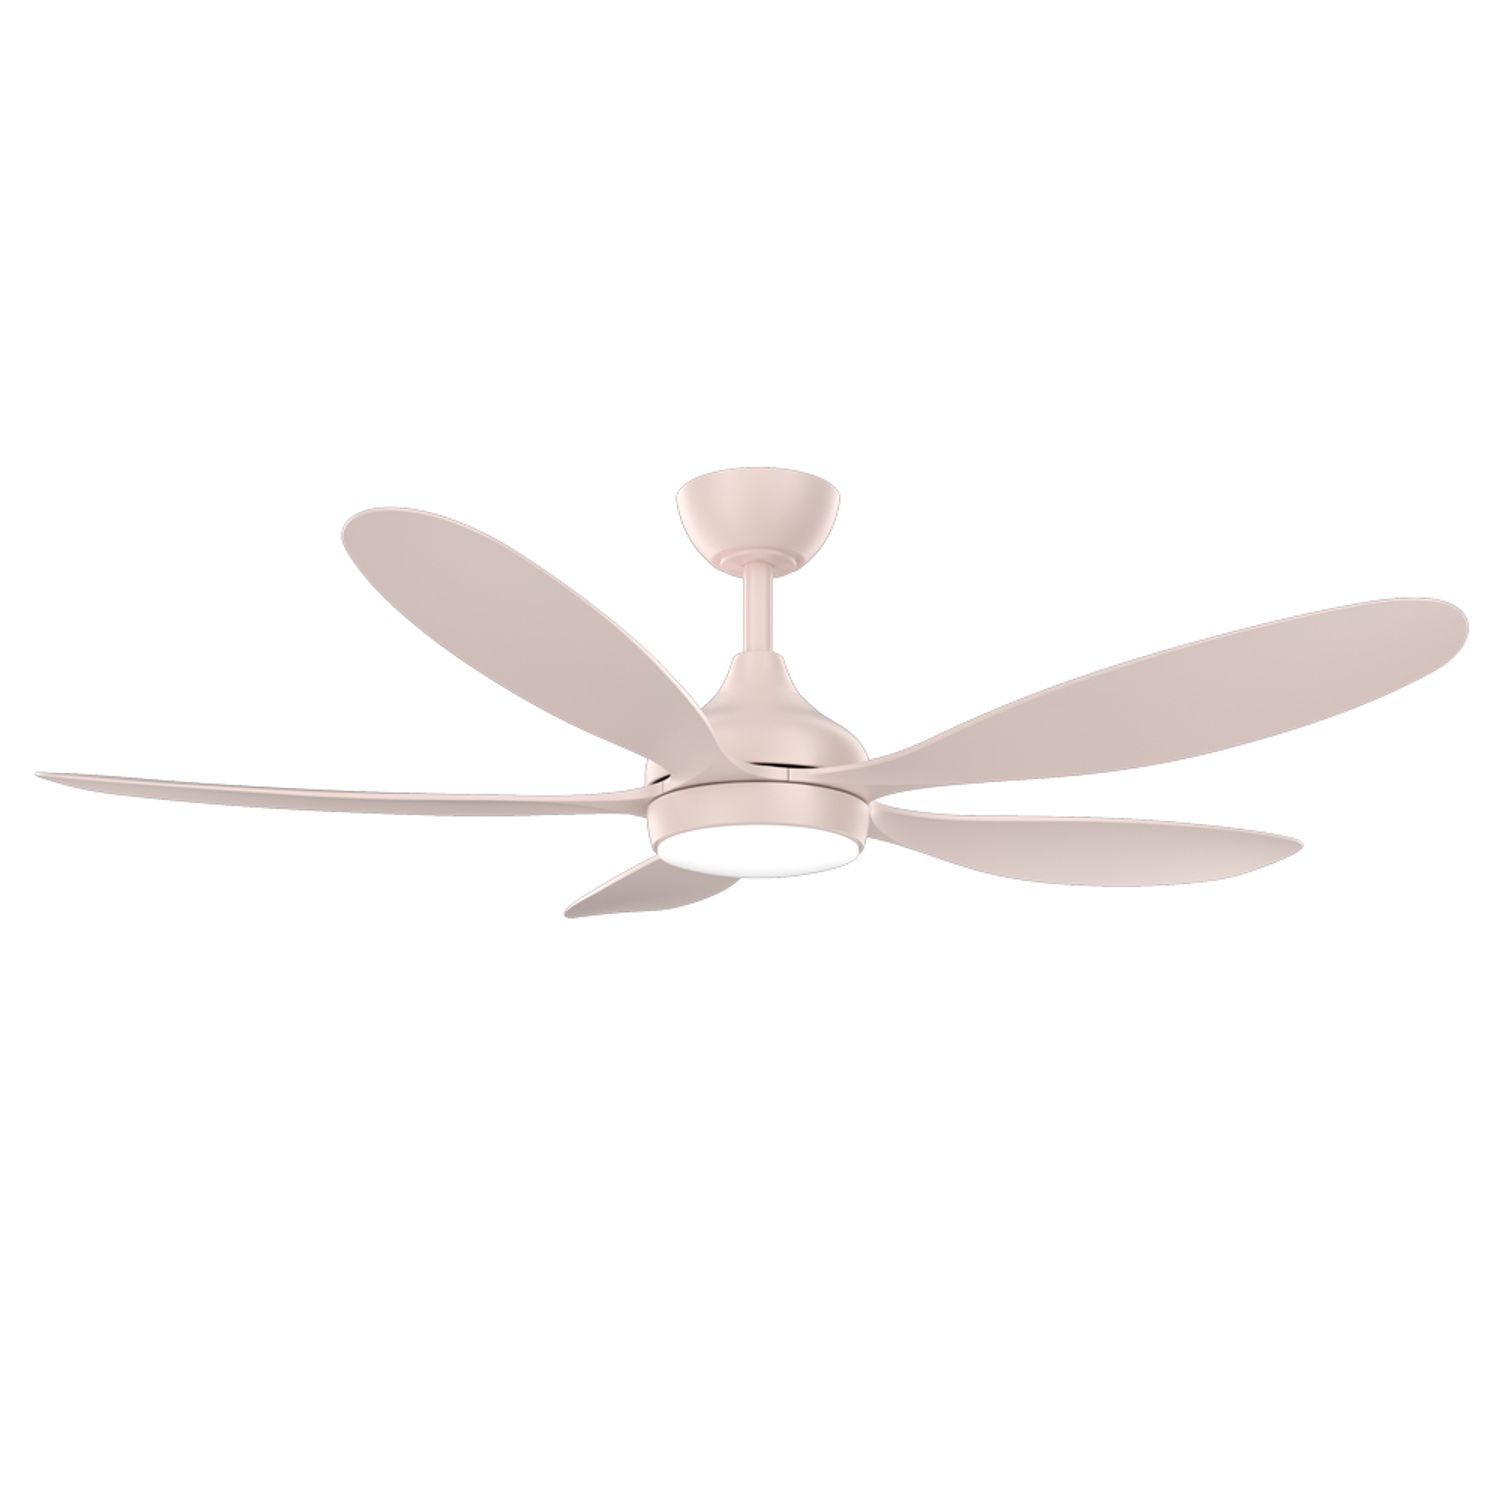 KBS all pink modern ceiling fan with dimmable light and smartphone control